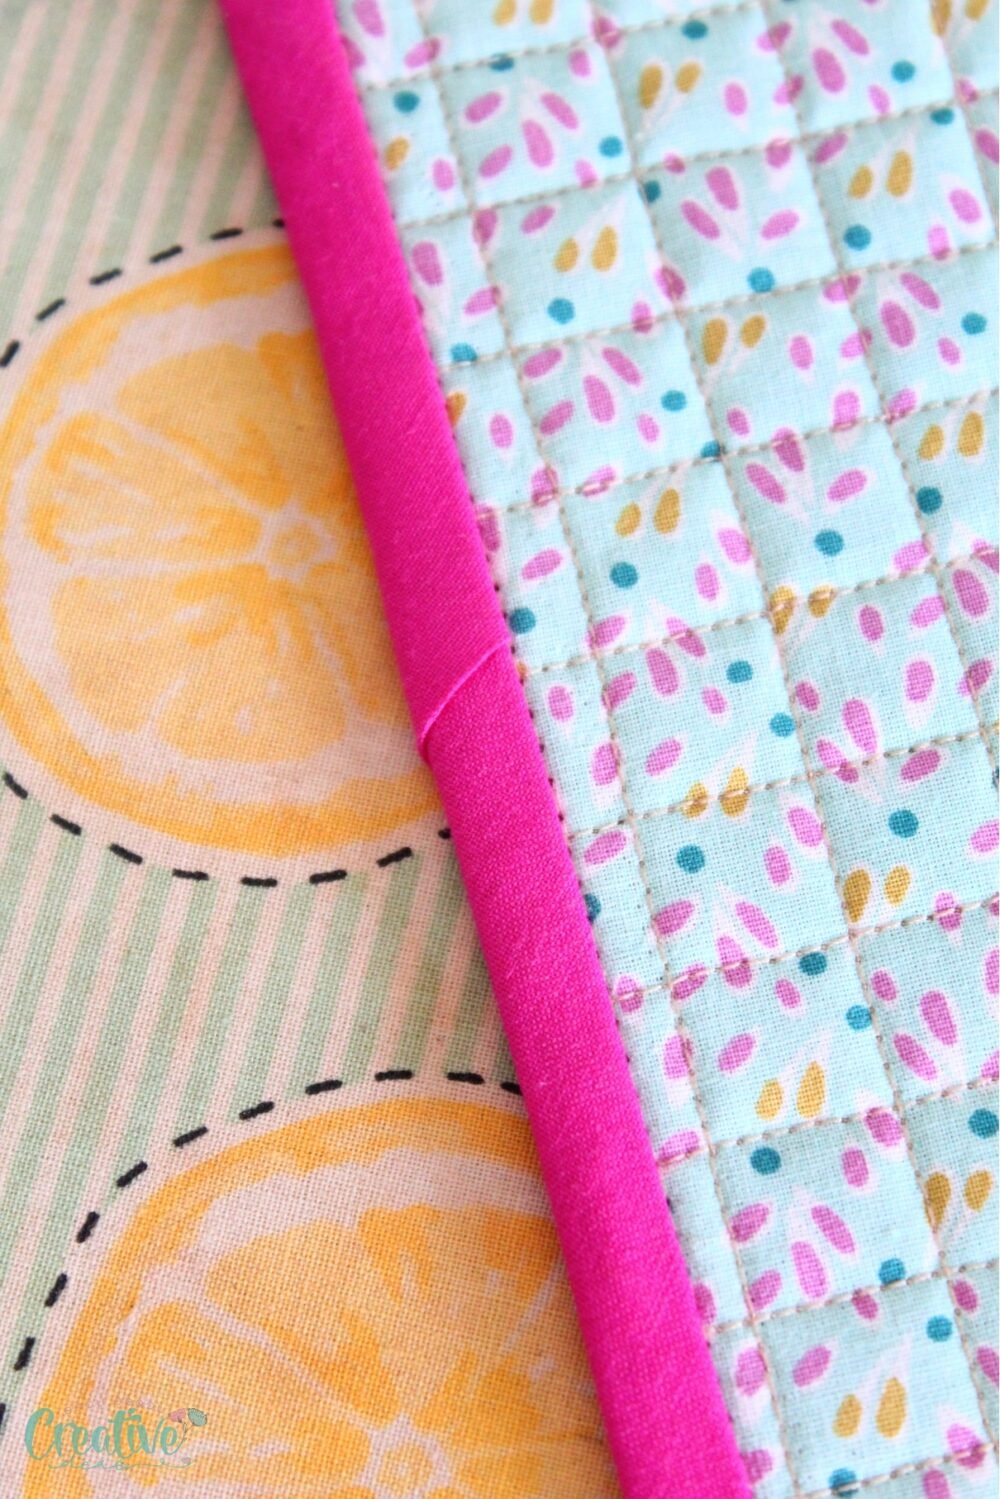 Improve your sewing creations by mastering the art of joining bias strips